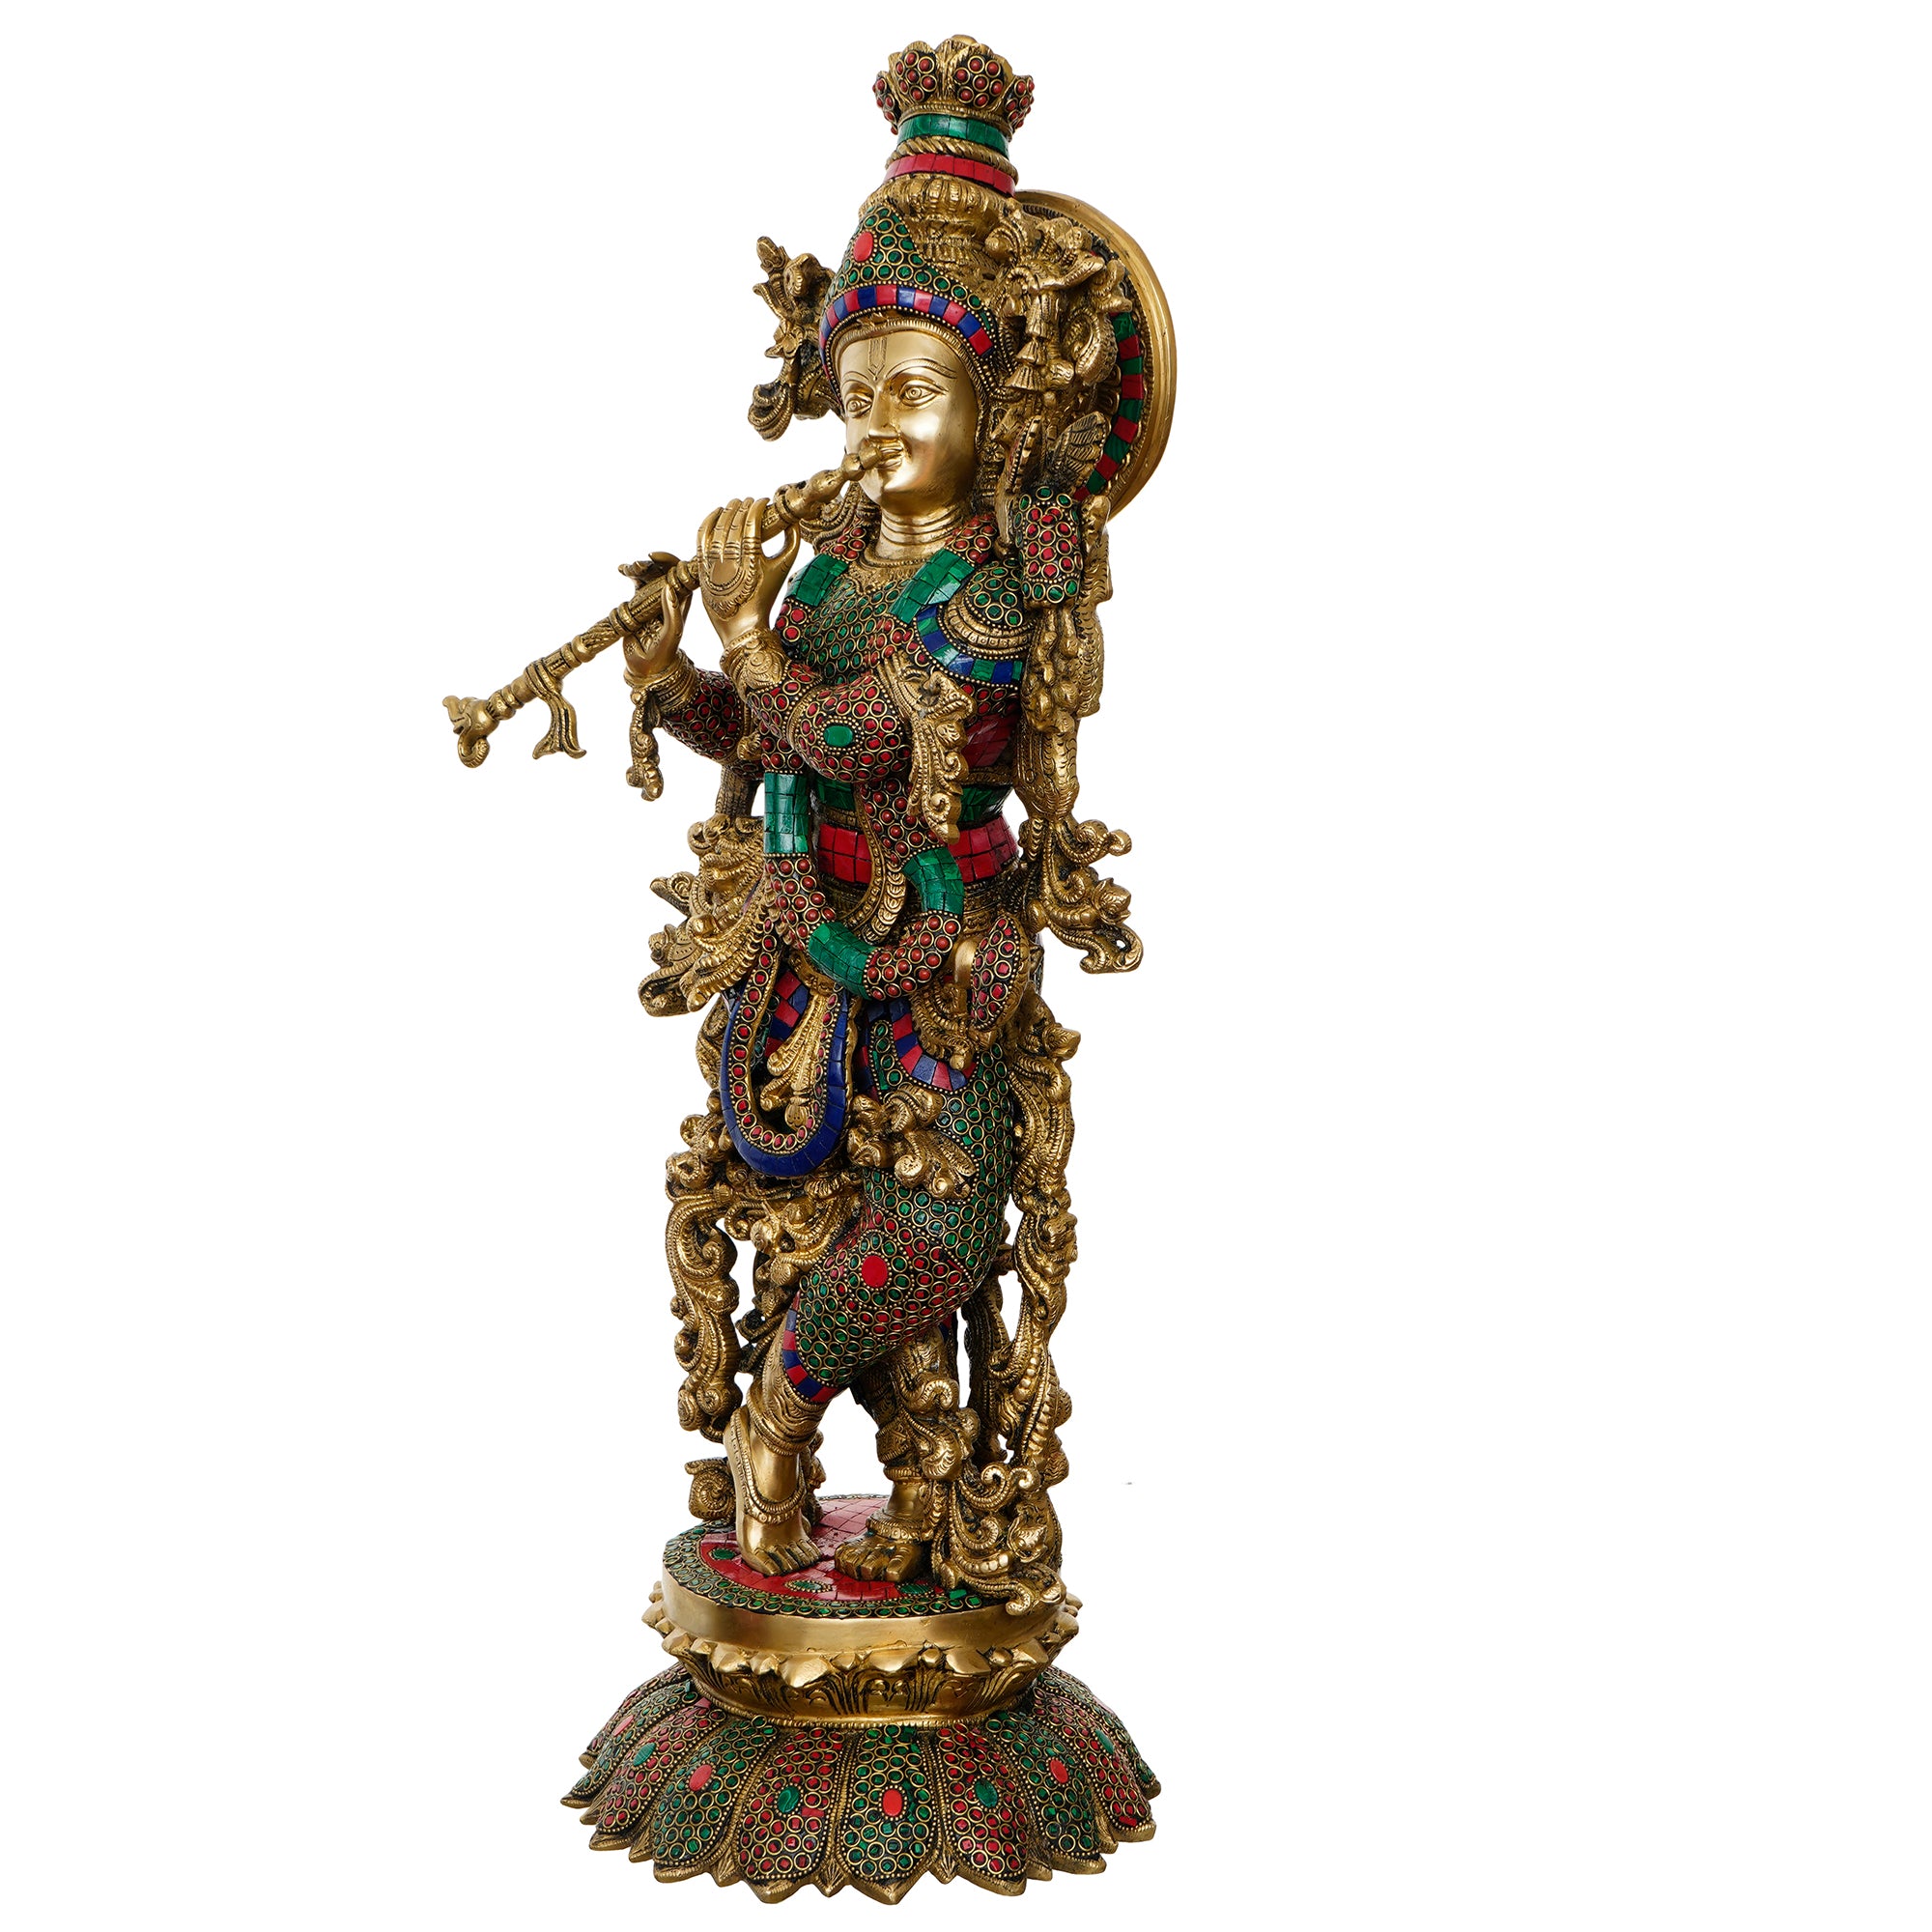 Golden Lord Krishna Playing Flute Handcrafted Brass Idol with Colorful Stone Work 4